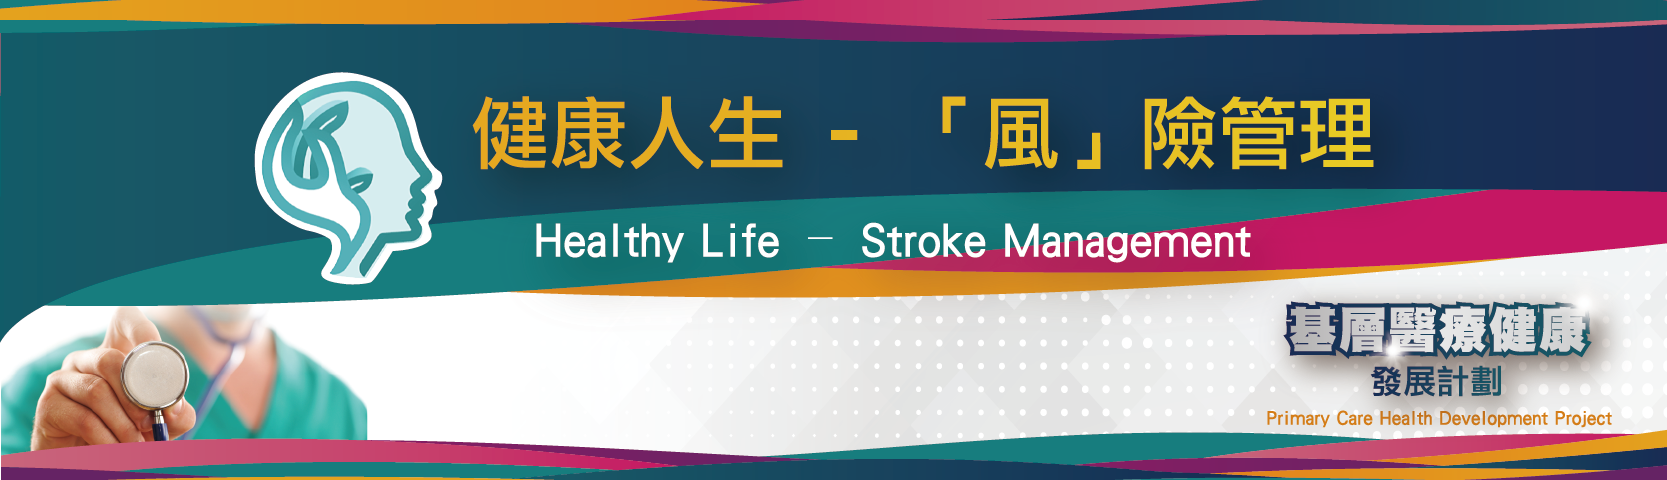 Healthy Life - Stroke Management